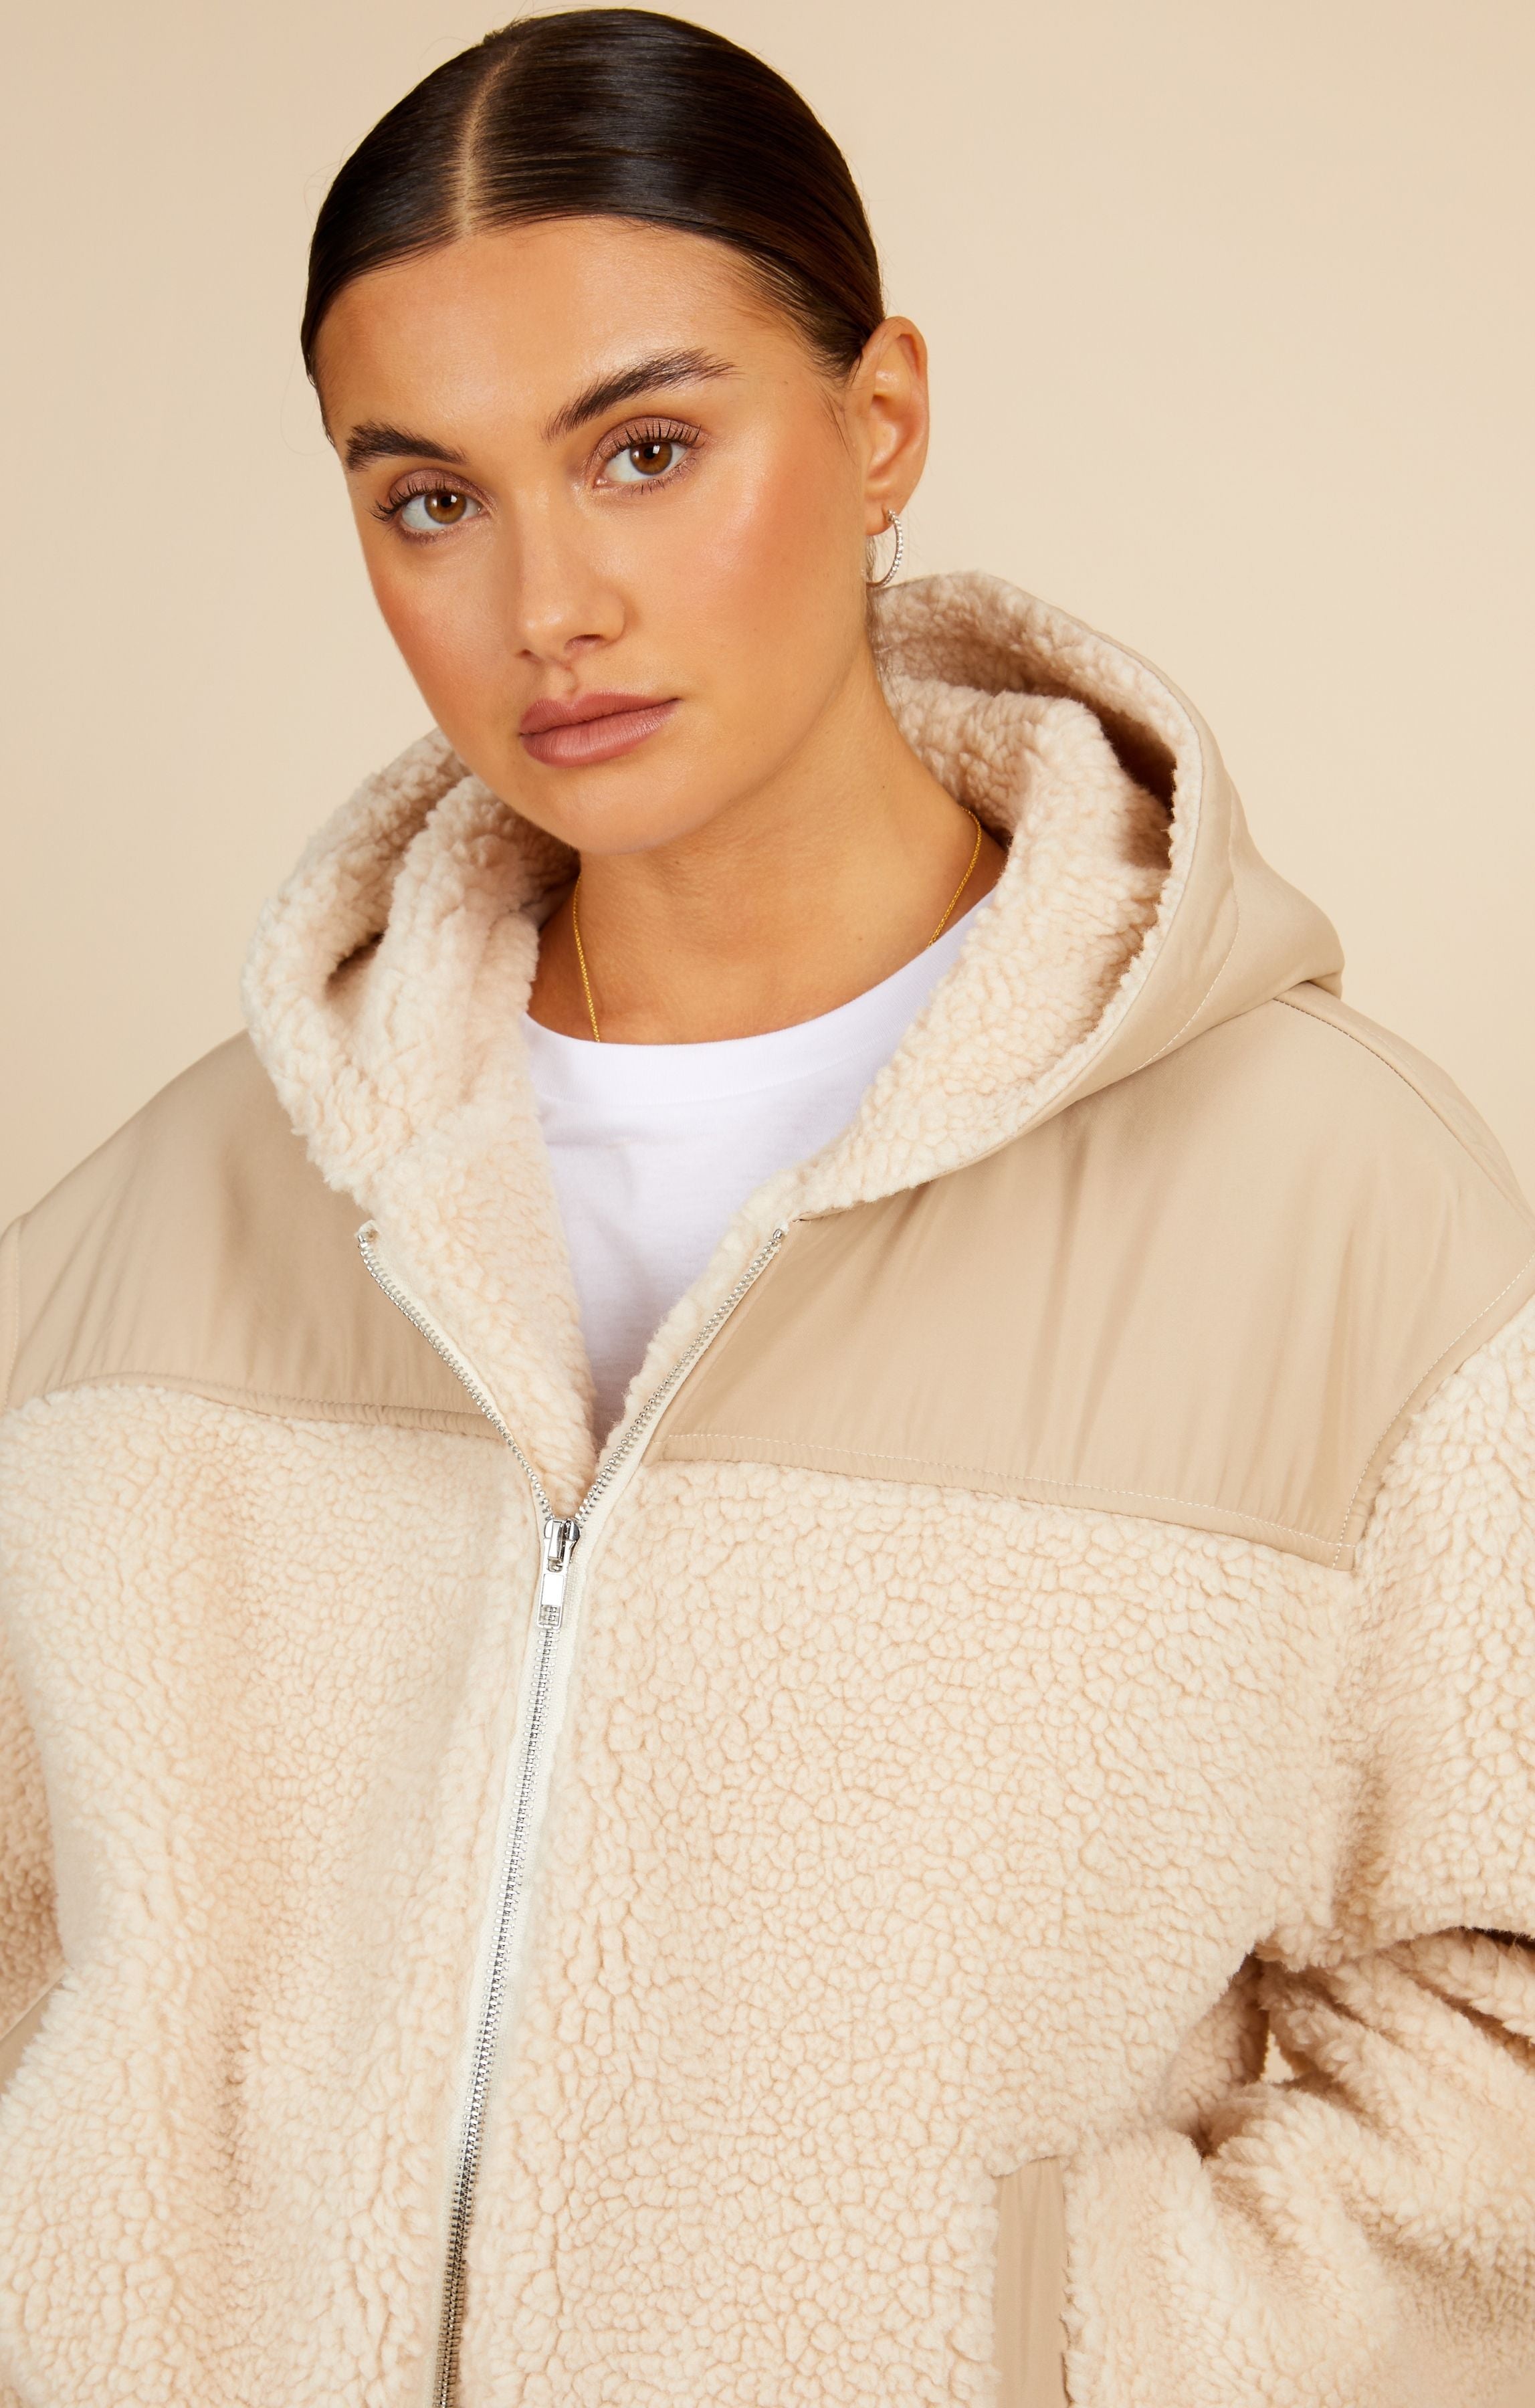 Little Mistress Cream Borg Hooded Jacket By Vogue Williams product image